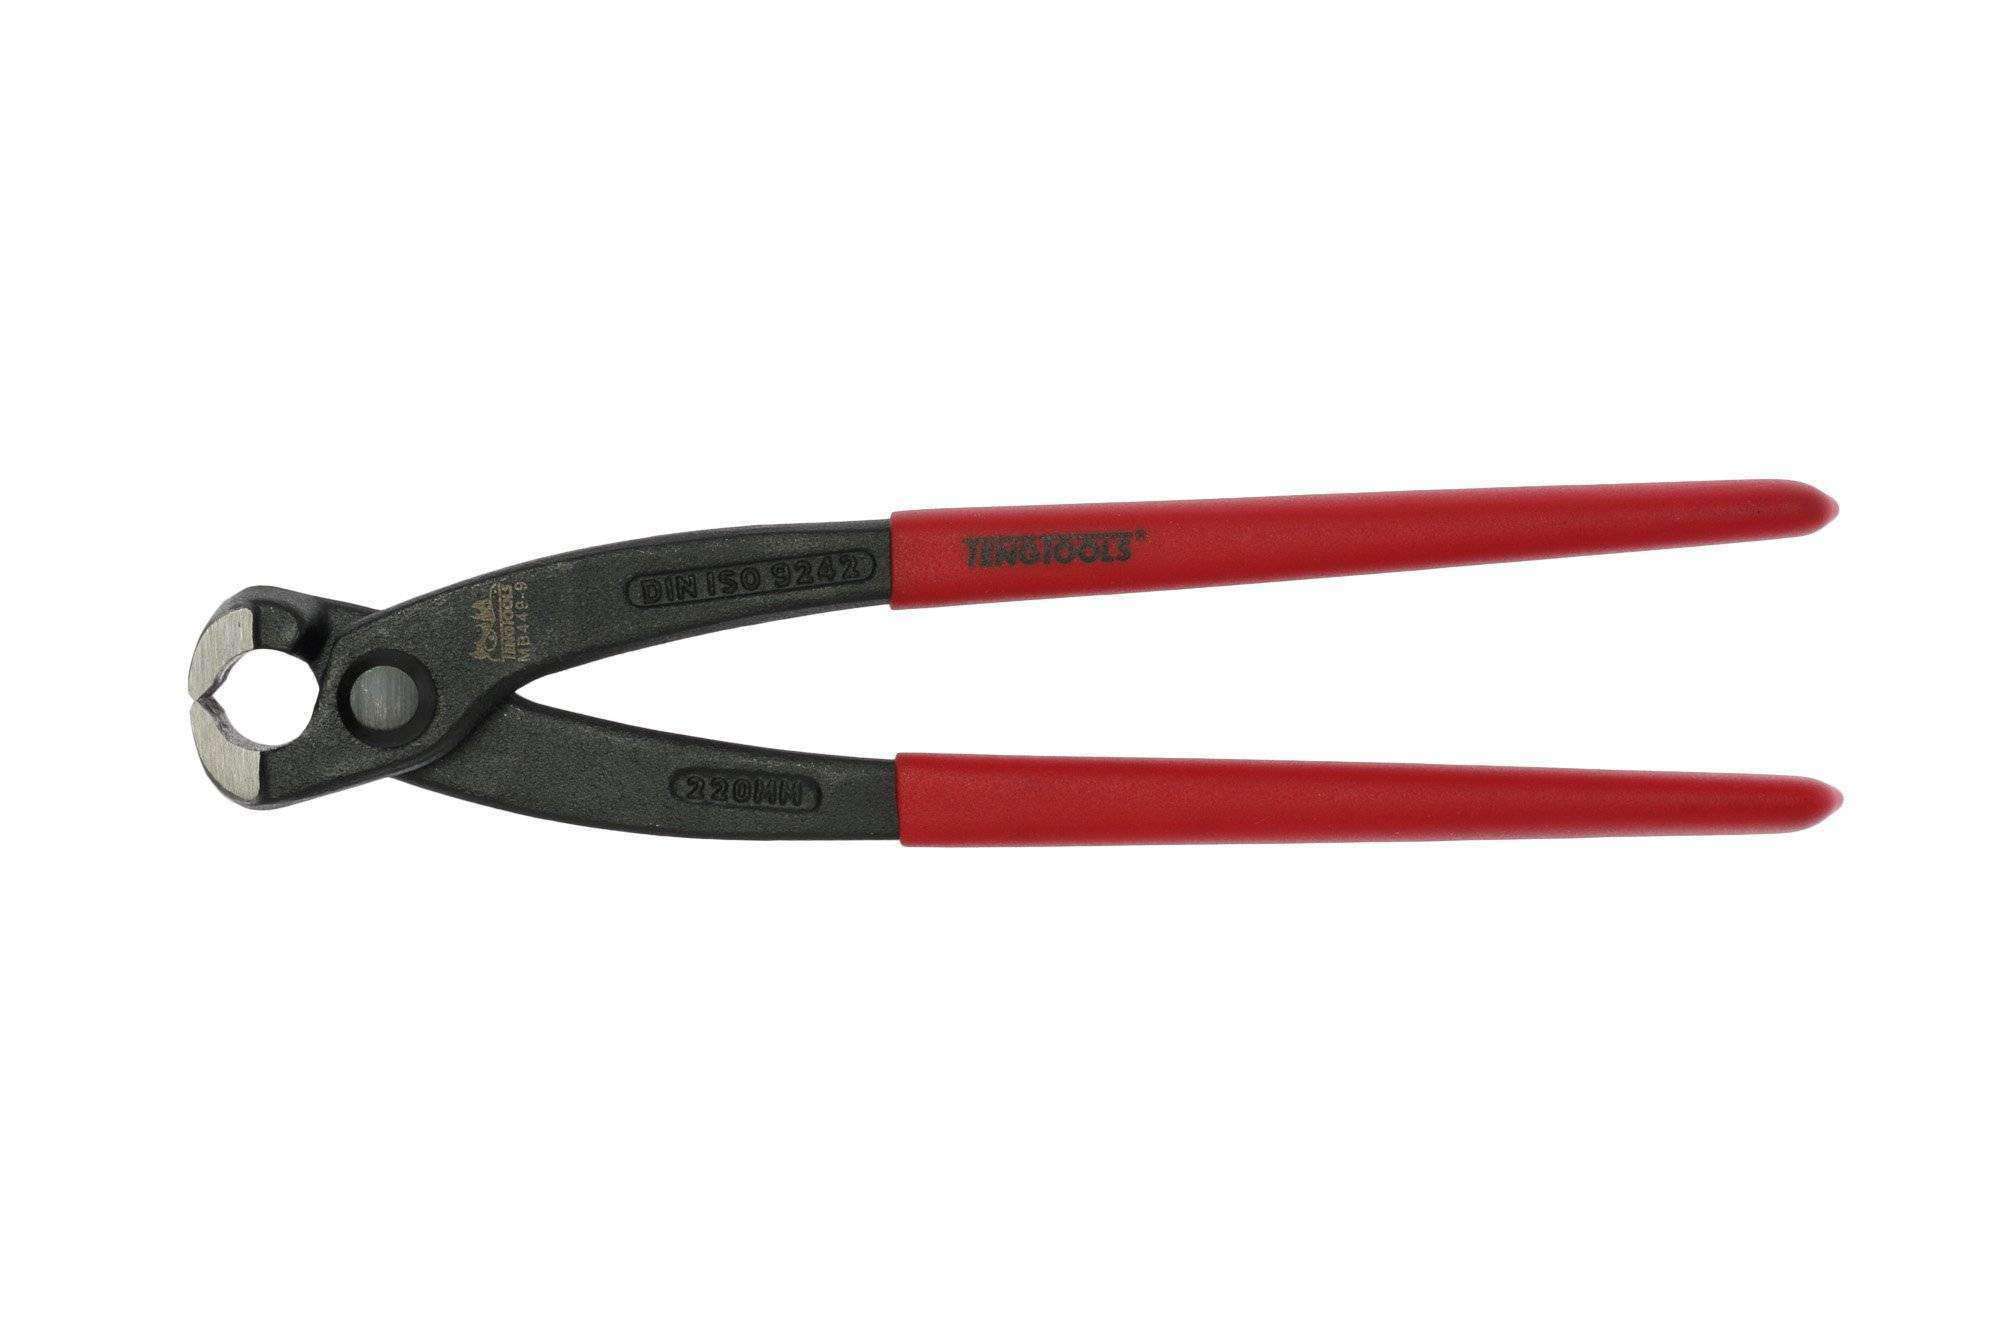 Teng Tools 9 Inch Industrial Tower Pincer Pliers / Cutters - MB449-9